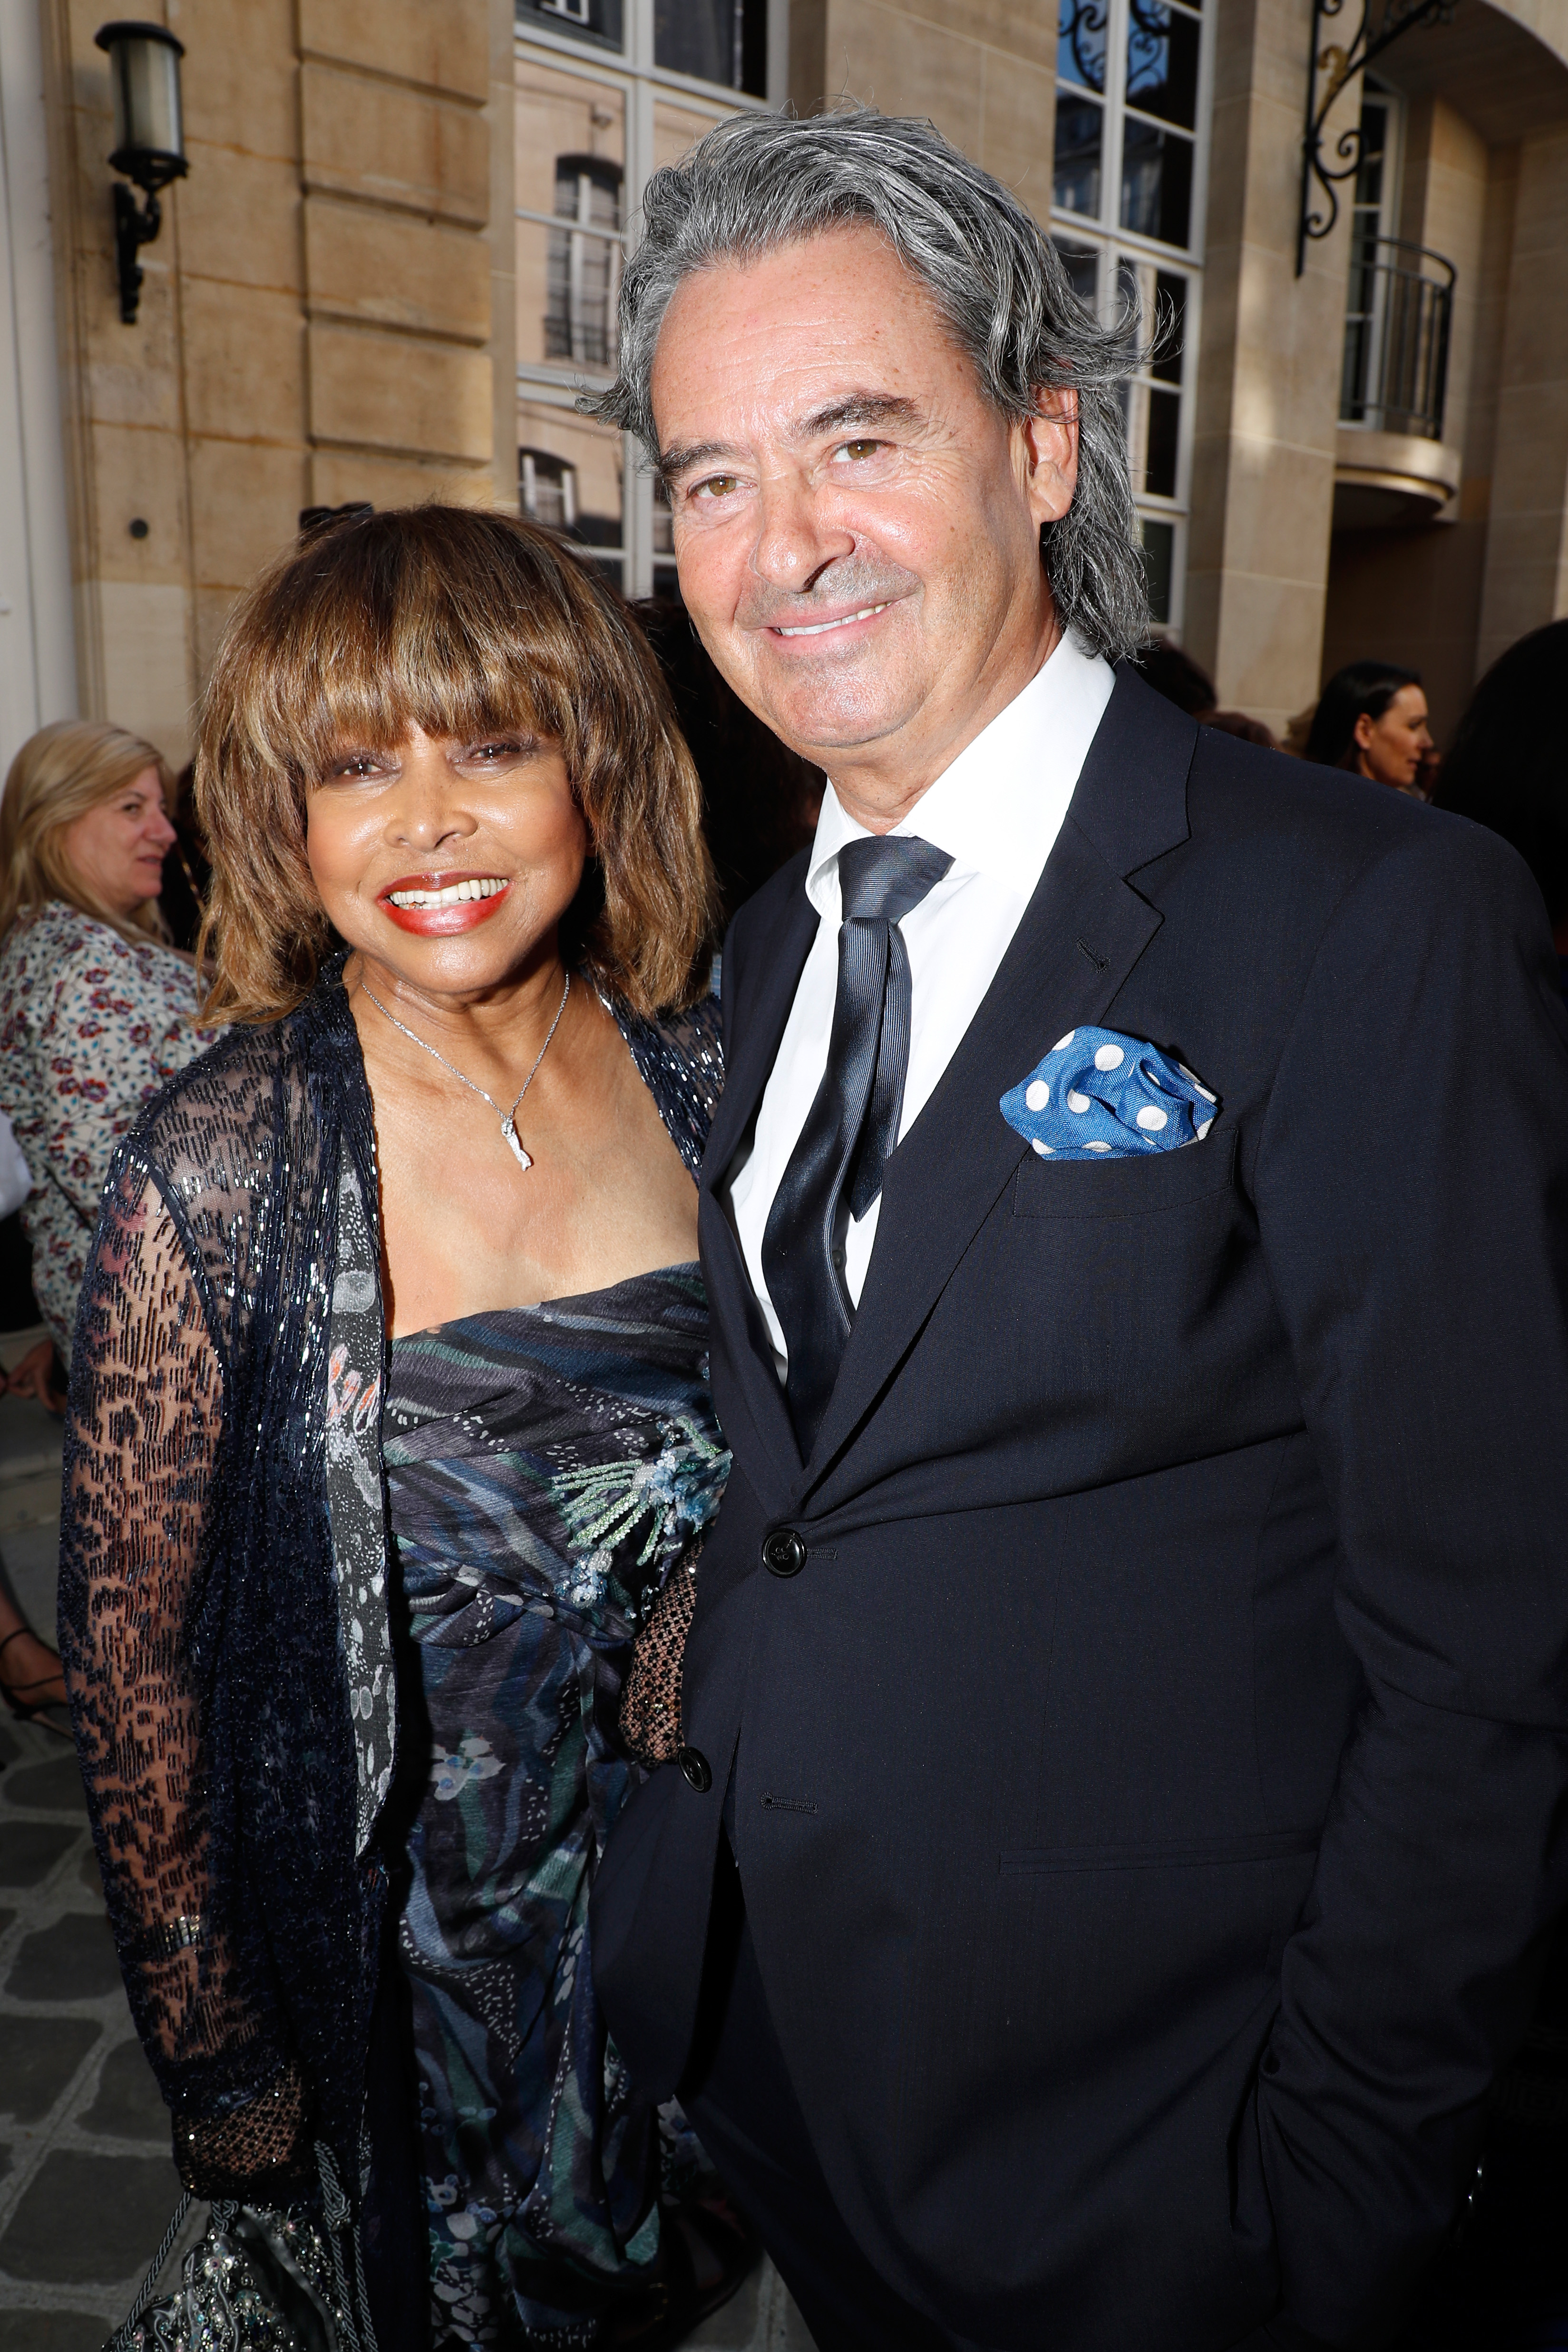 Tina Turner and Erwin Bach in Paris, France on July 3, 2018 | Source: Getty Images